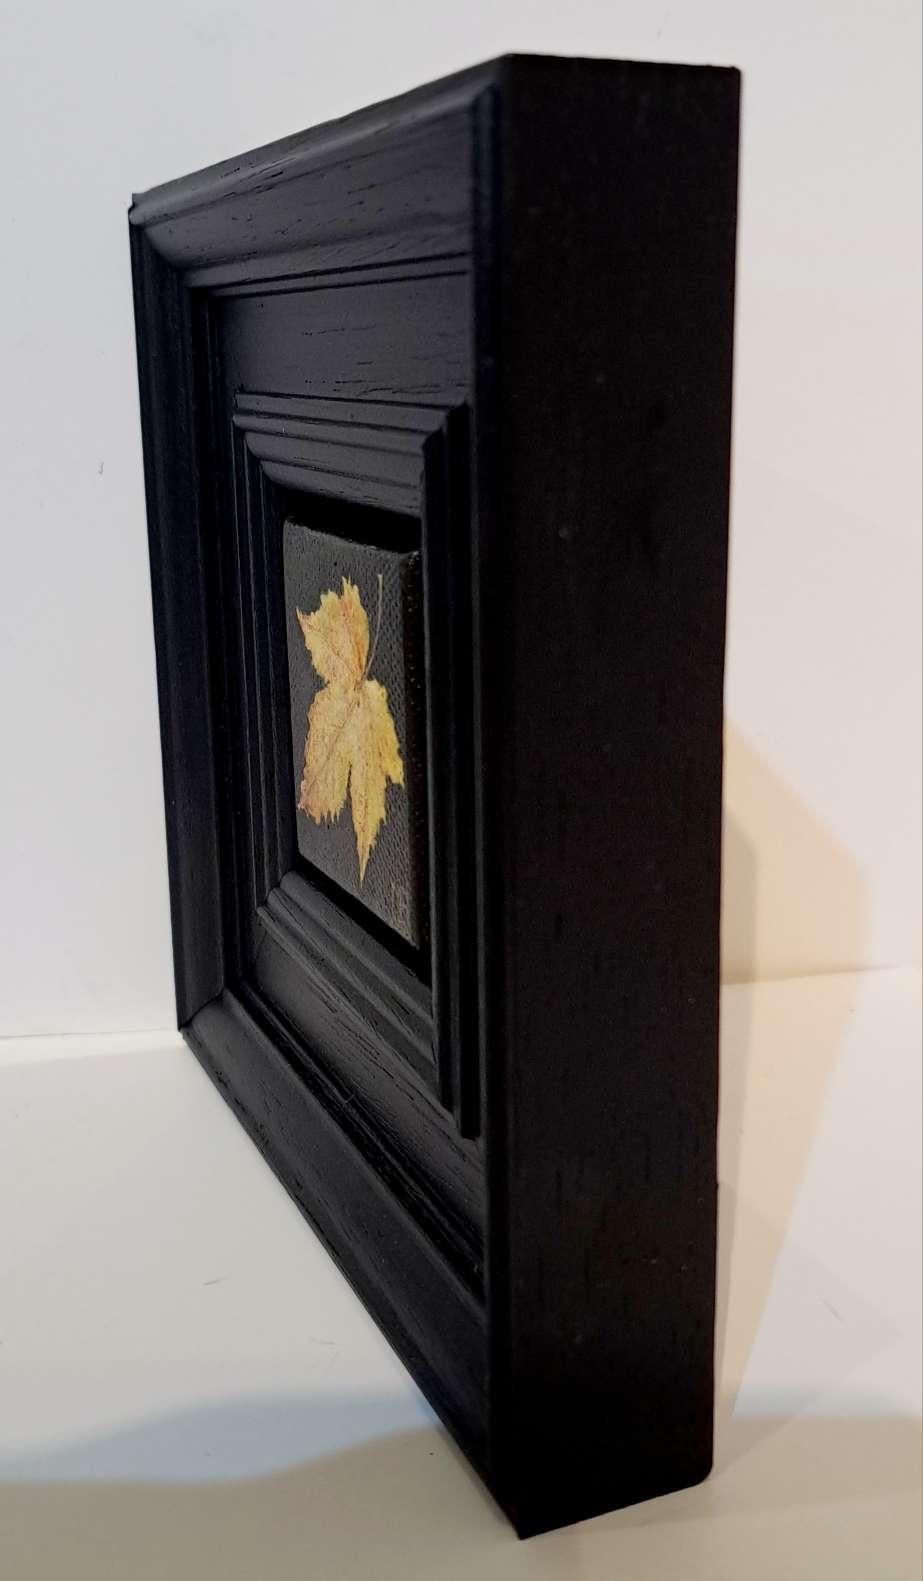 Pocket Autumn Leaf Collection #2 (Naples Yellow) is an original oil painting by Dani Humberstone as part of her Pocket Painting series featuring small scale realistic oil paintings, with a nod to baroque still life painting. The paintings are set in